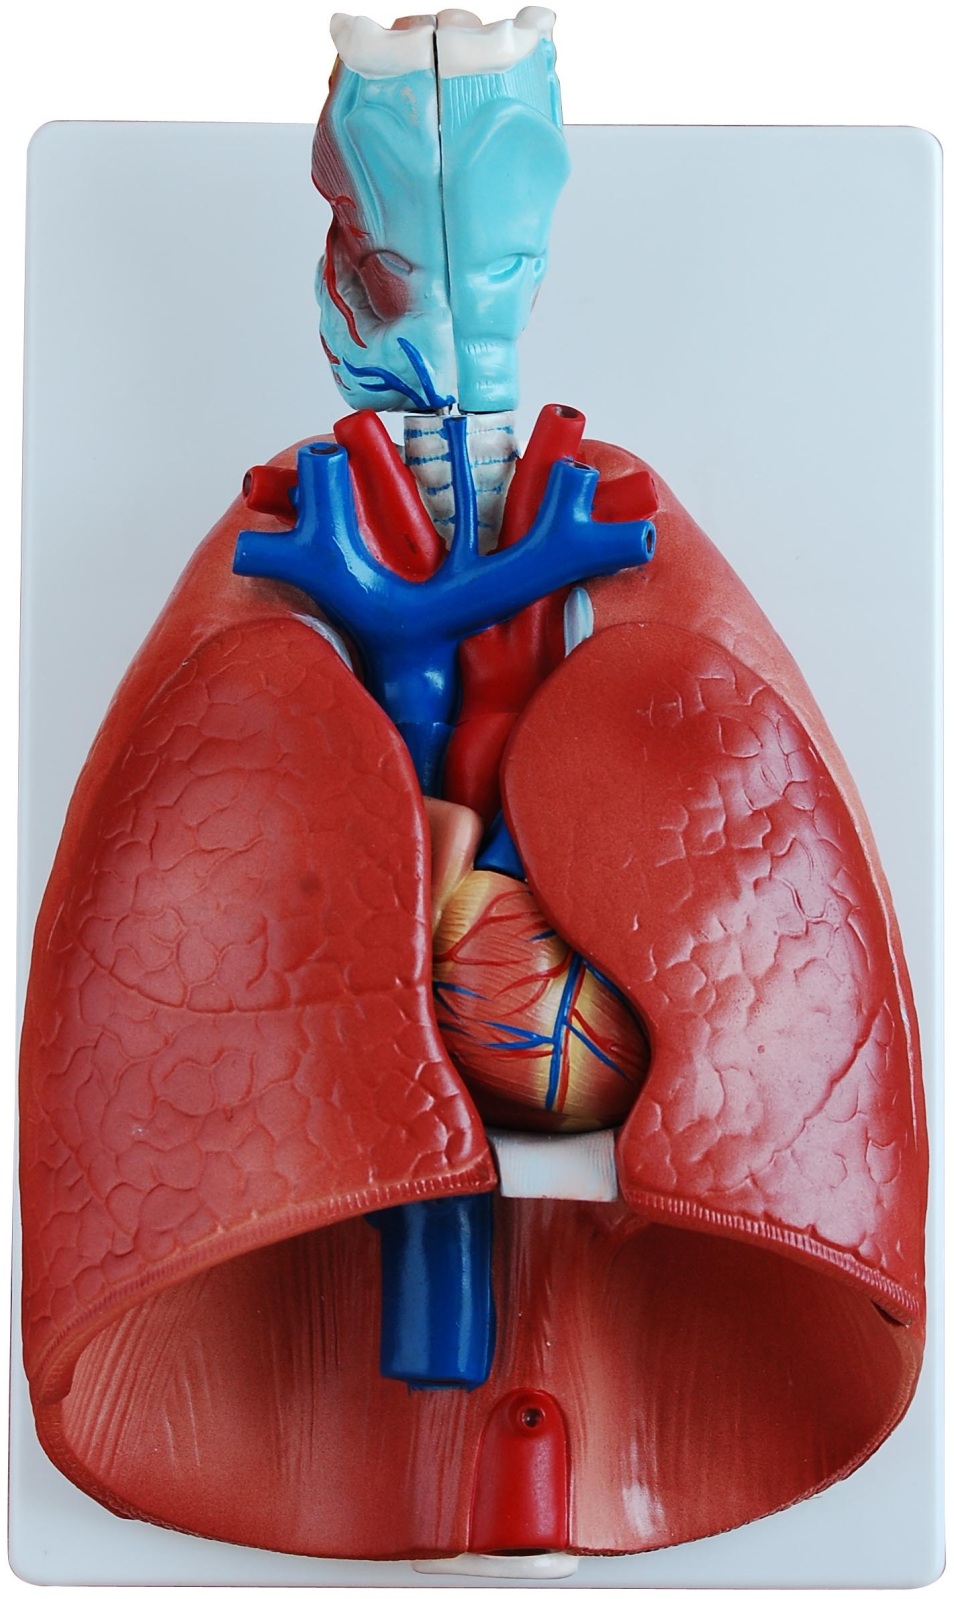 Human Larynx, Heart and Lung Anatomical Model - Medical ...